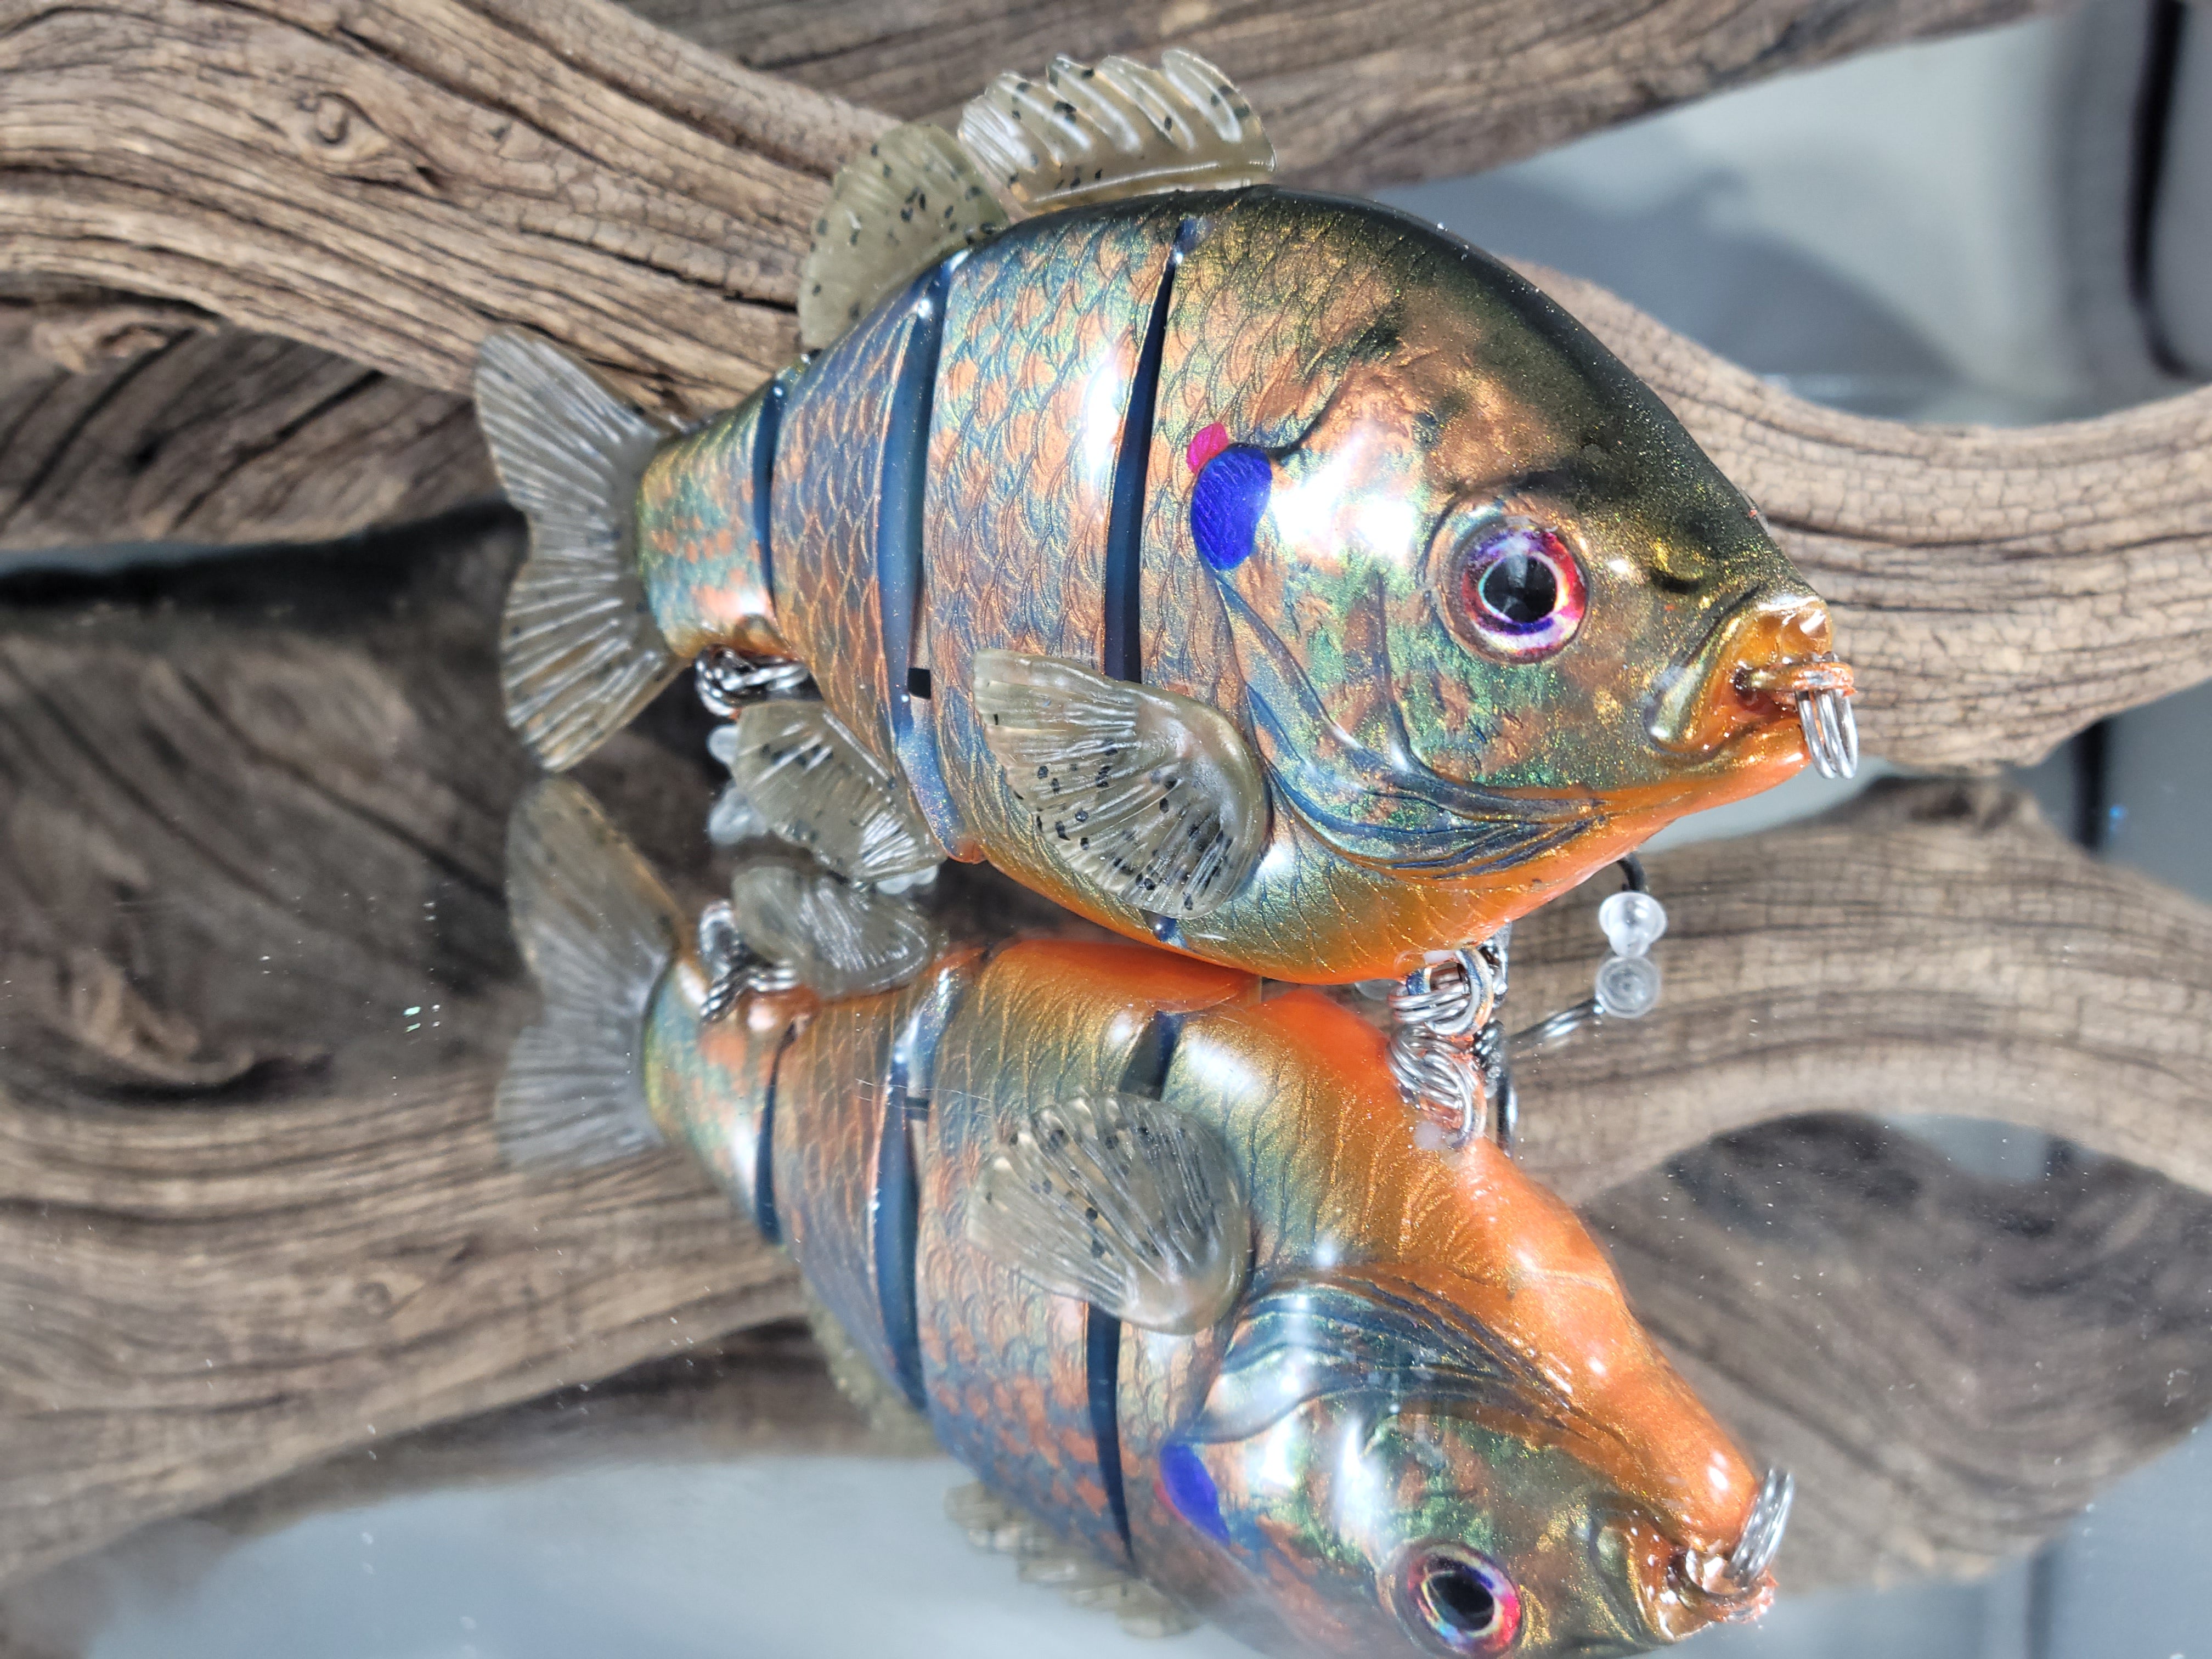 Deluxe Gill Style Swimbait - Pumpkinseed - Clyde's Cranks